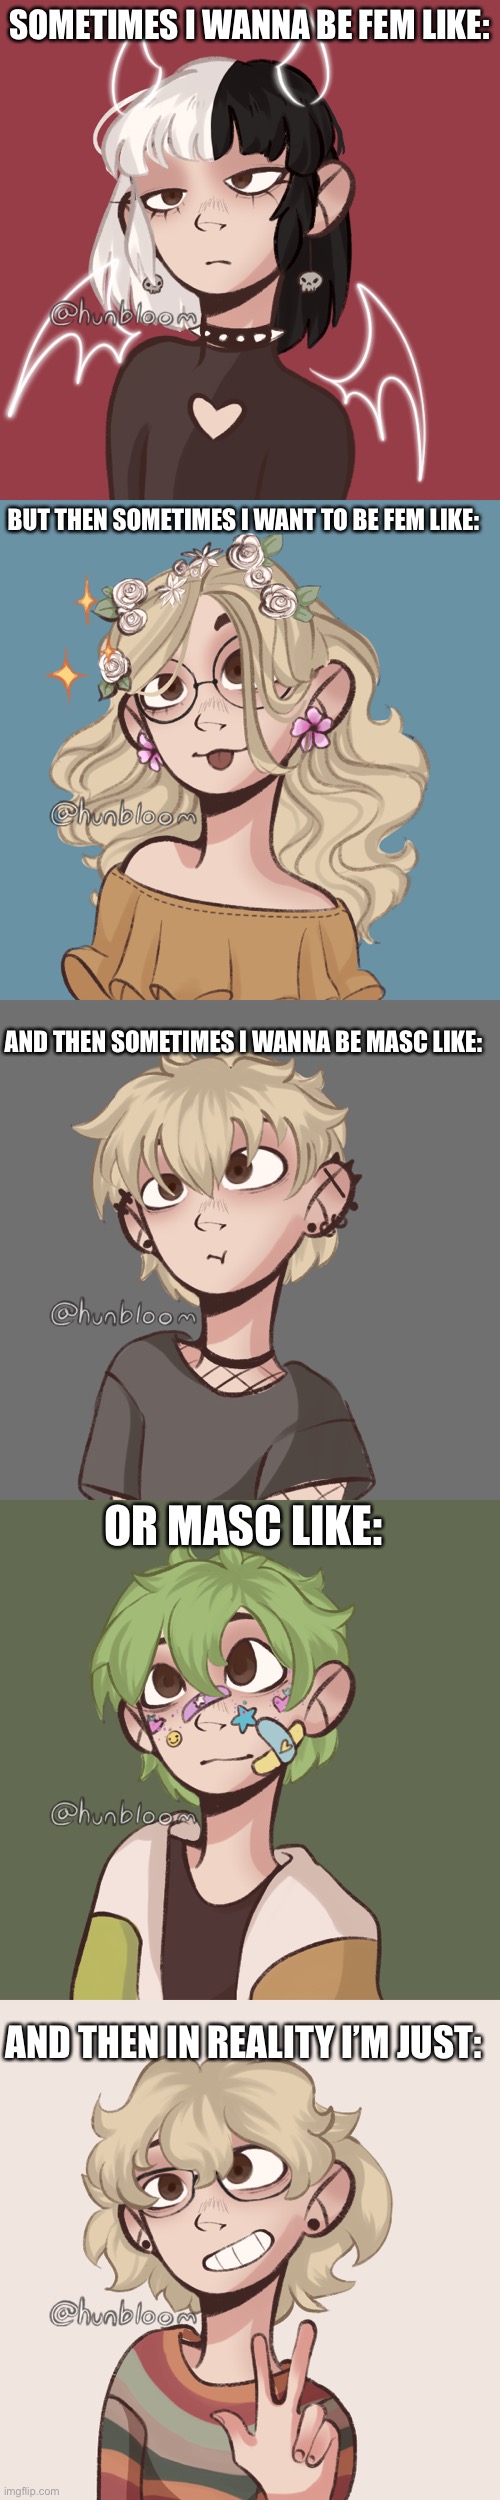 If only I had money for a bunch of wigs | SOMETIMES I WANNA BE FEM LIKE:; BUT THEN SOMETIMES I WANT TO BE FEM LIKE:; AND THEN SOMETIMES I WANNA BE MASC LIKE:; OR MASC LIKE:; AND THEN IN REALITY I’M JUST: | made w/ Imgflip meme maker